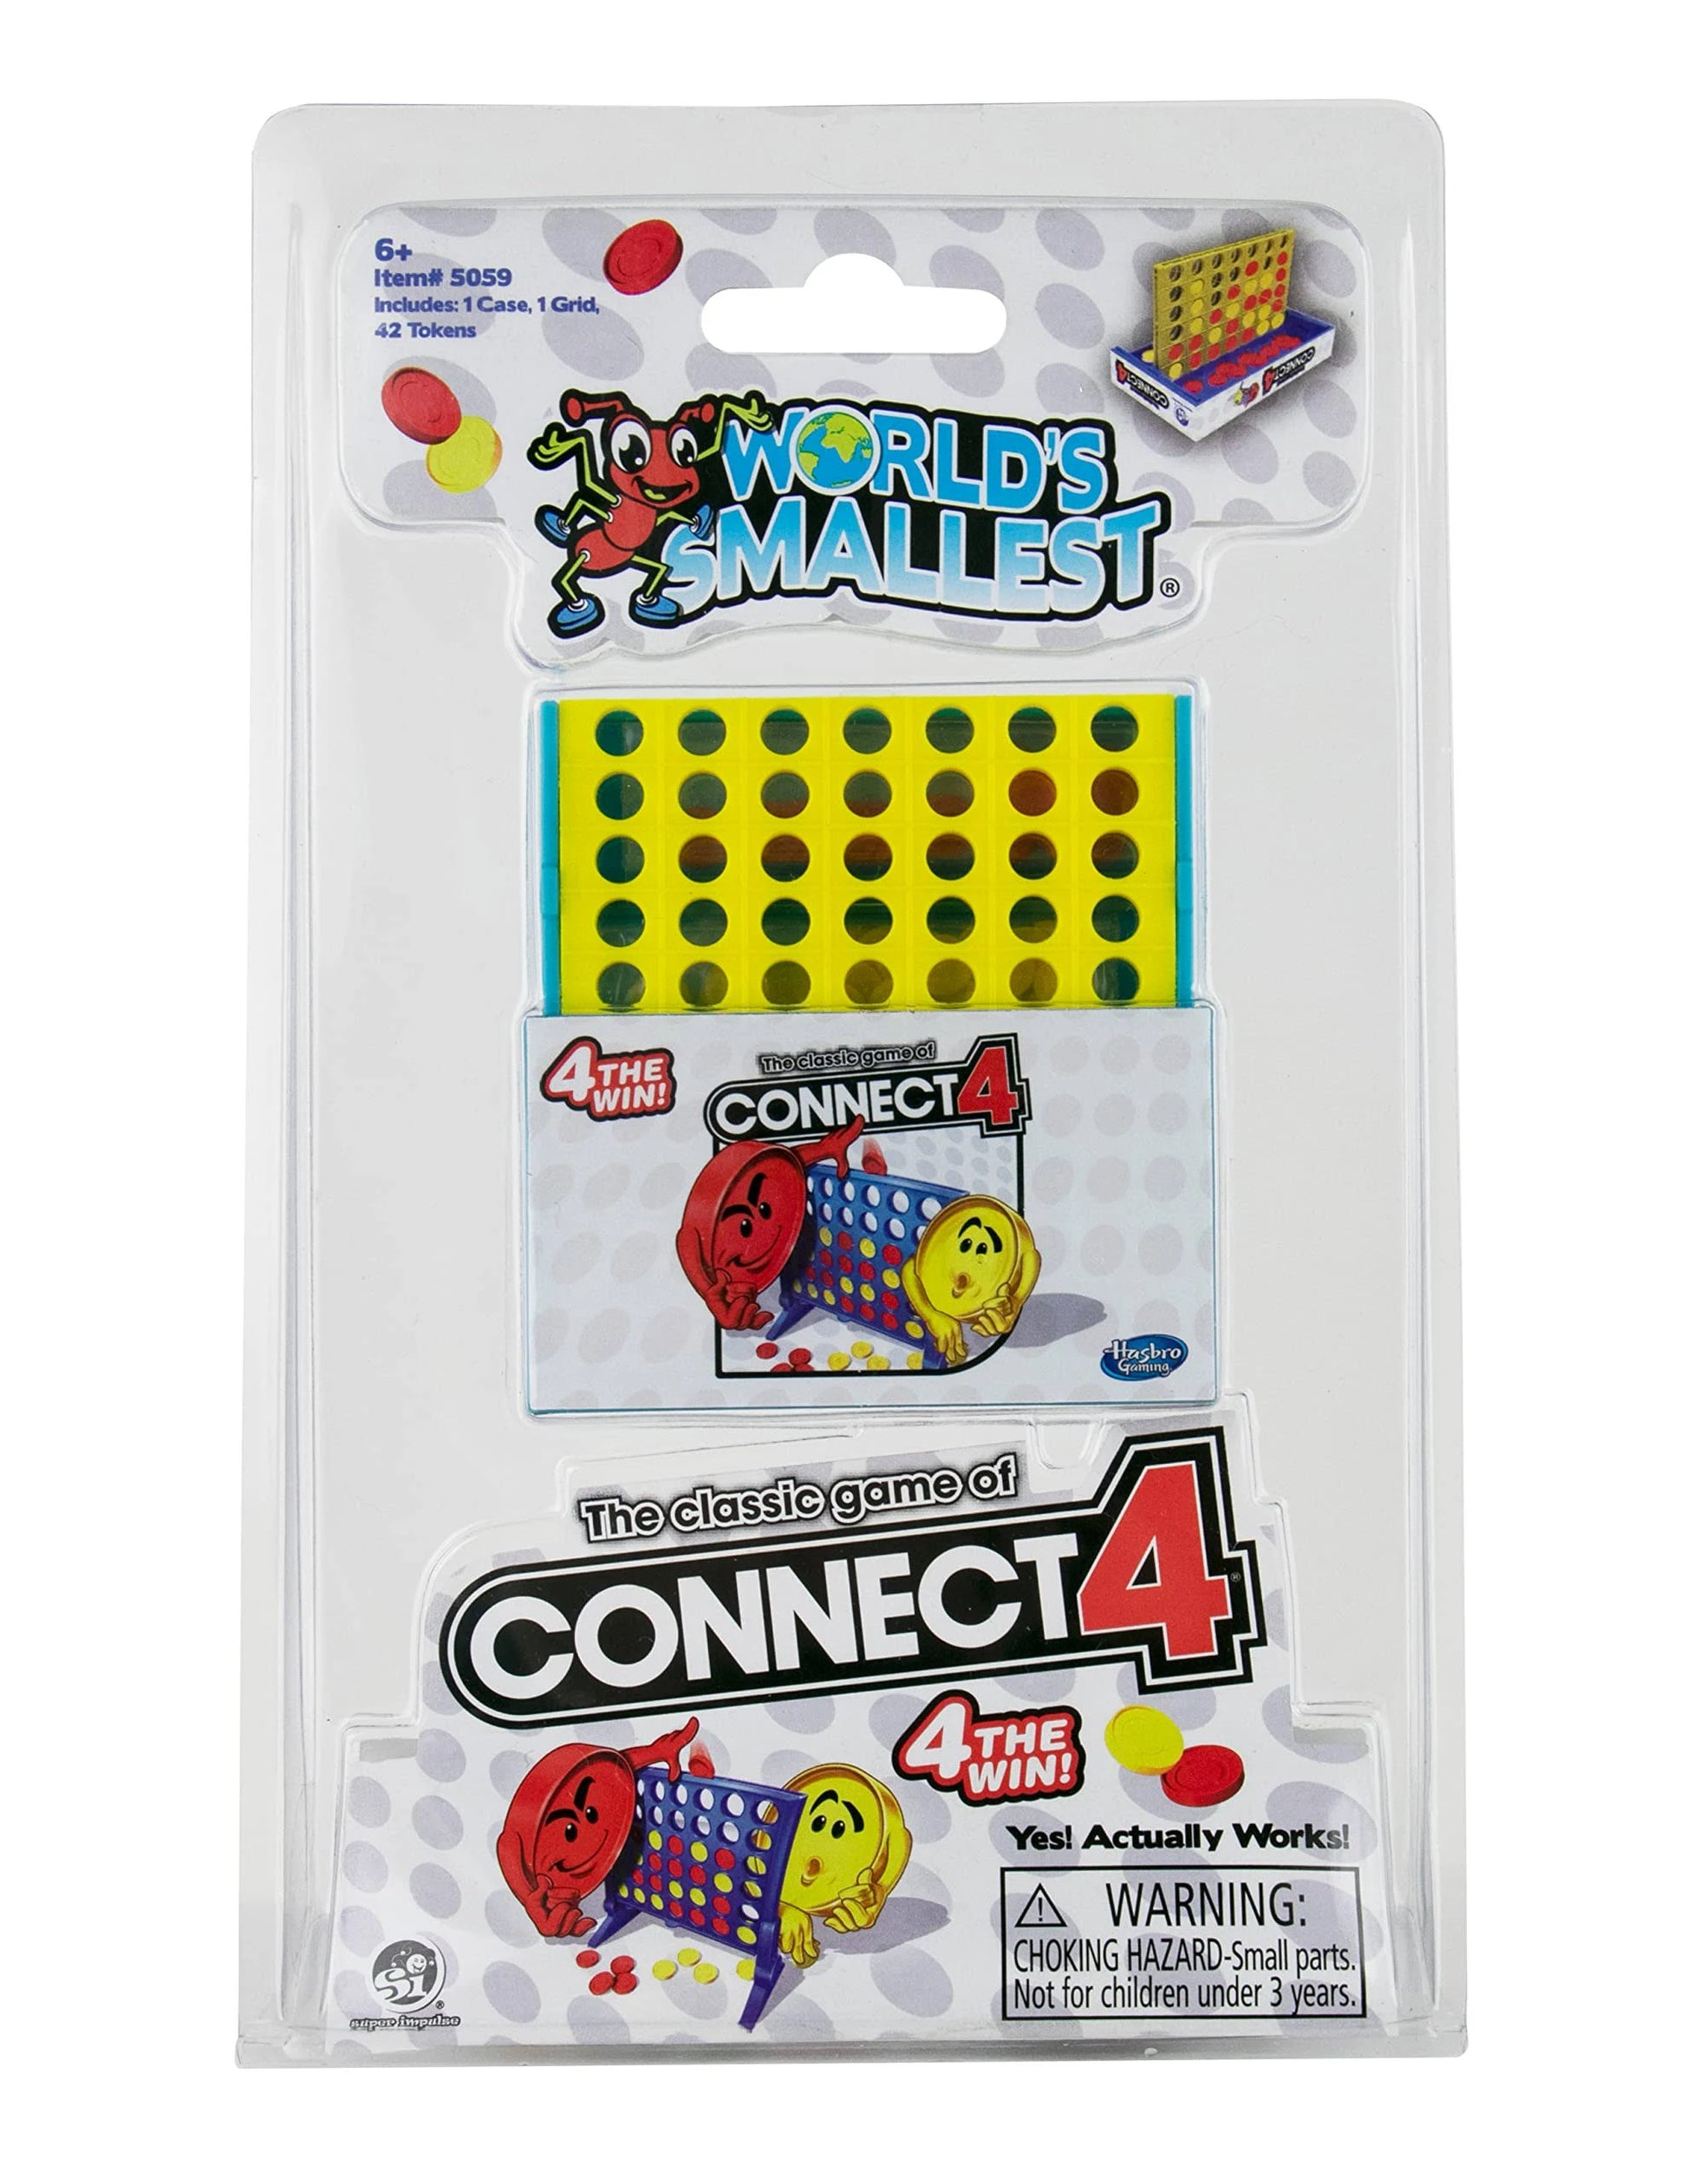 World's Smallest Connect 4 – Guildhall Games